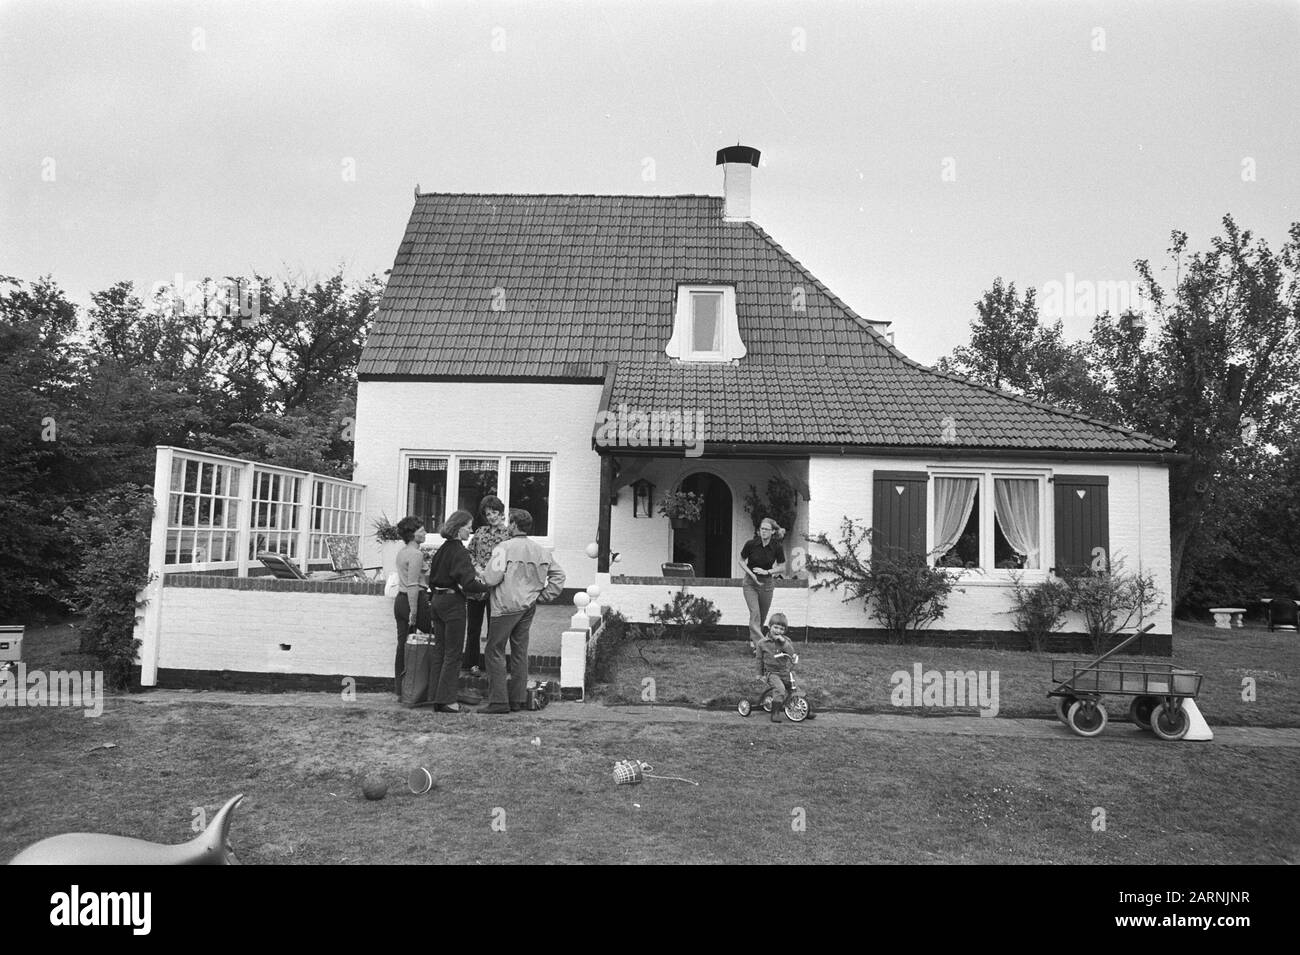 Princess Margriet with Prince Maurits and Prins Bernhard jr. on holiday at Schiermonnikoog  Holiday residence Annotation: Marginals negative strip: 8, 9: prince Maurits; 10, 11: holiday house Date: 9 June 1971 Location: Friesland, Schiermonnikoog Keywords: islands, holiday homes Stock Photo